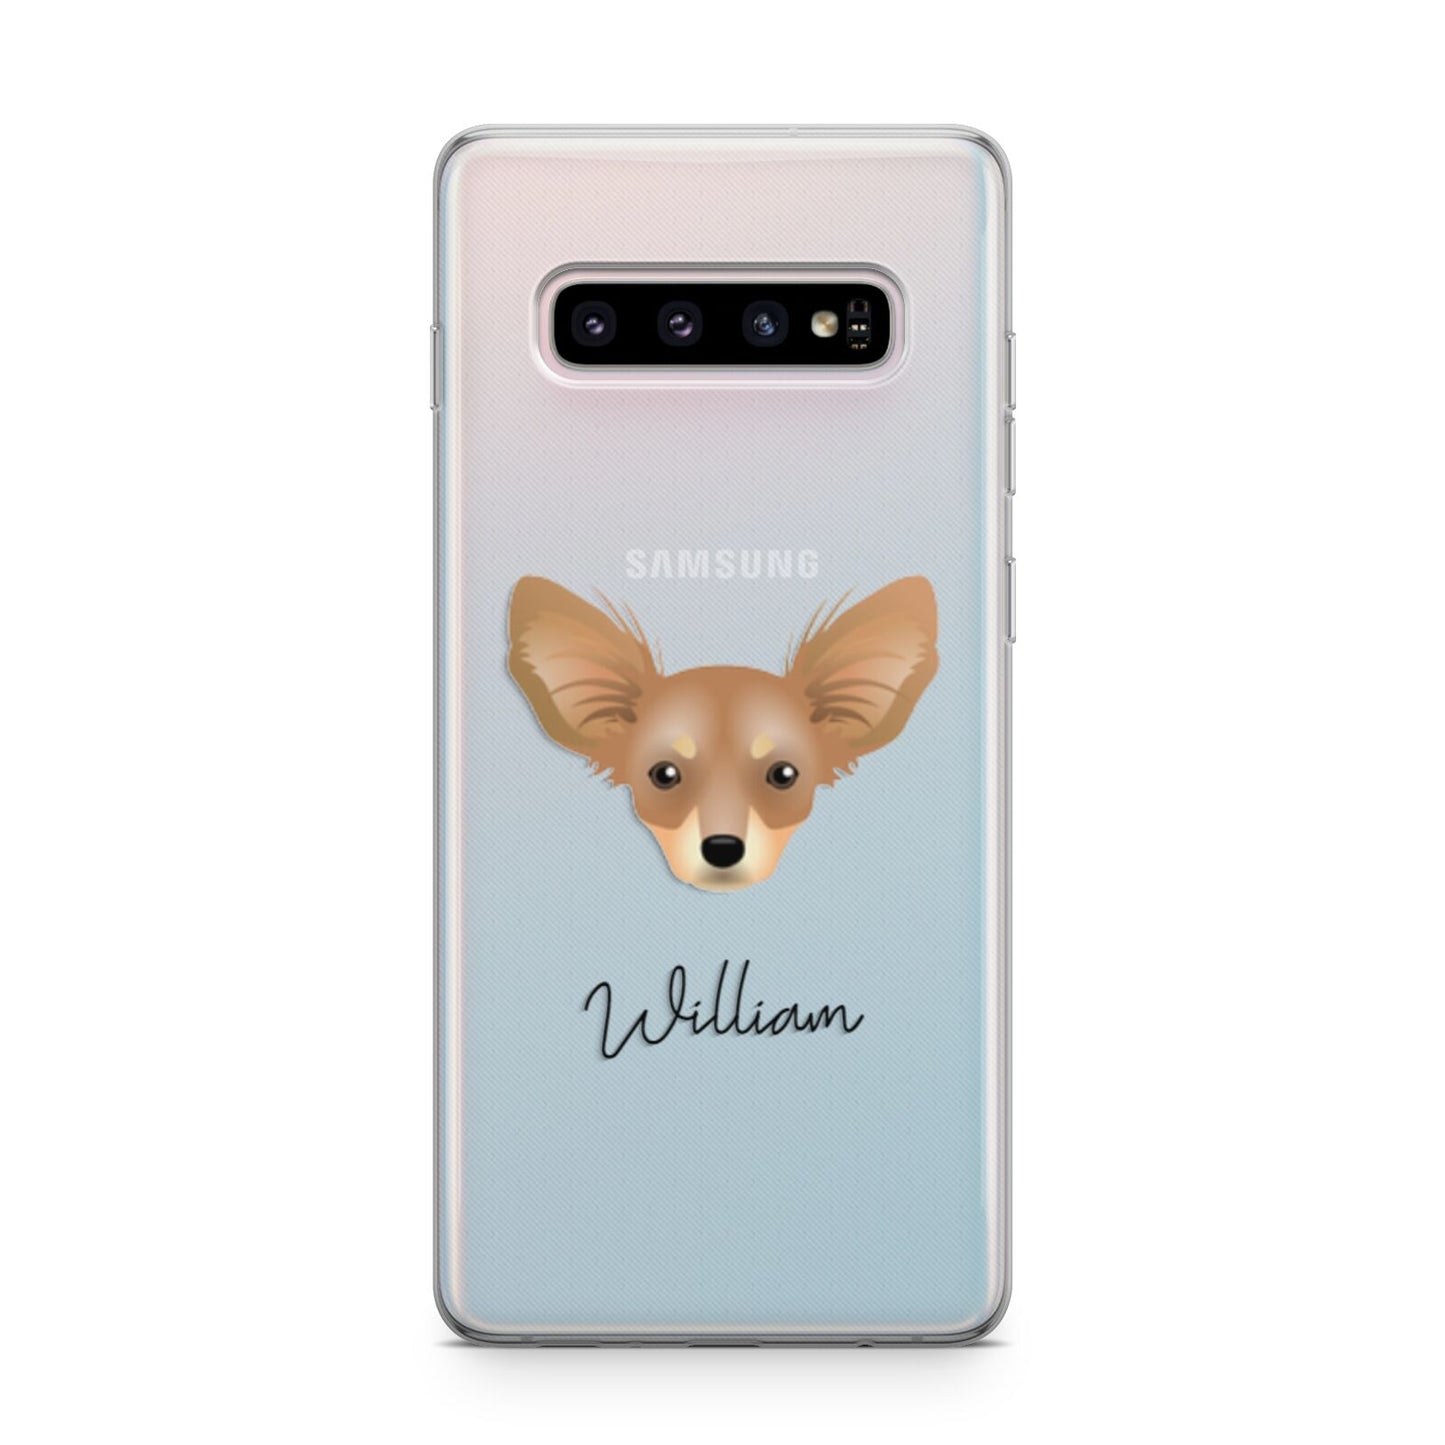 Russian Toy Personalised Samsung Galaxy S10 Plus Case